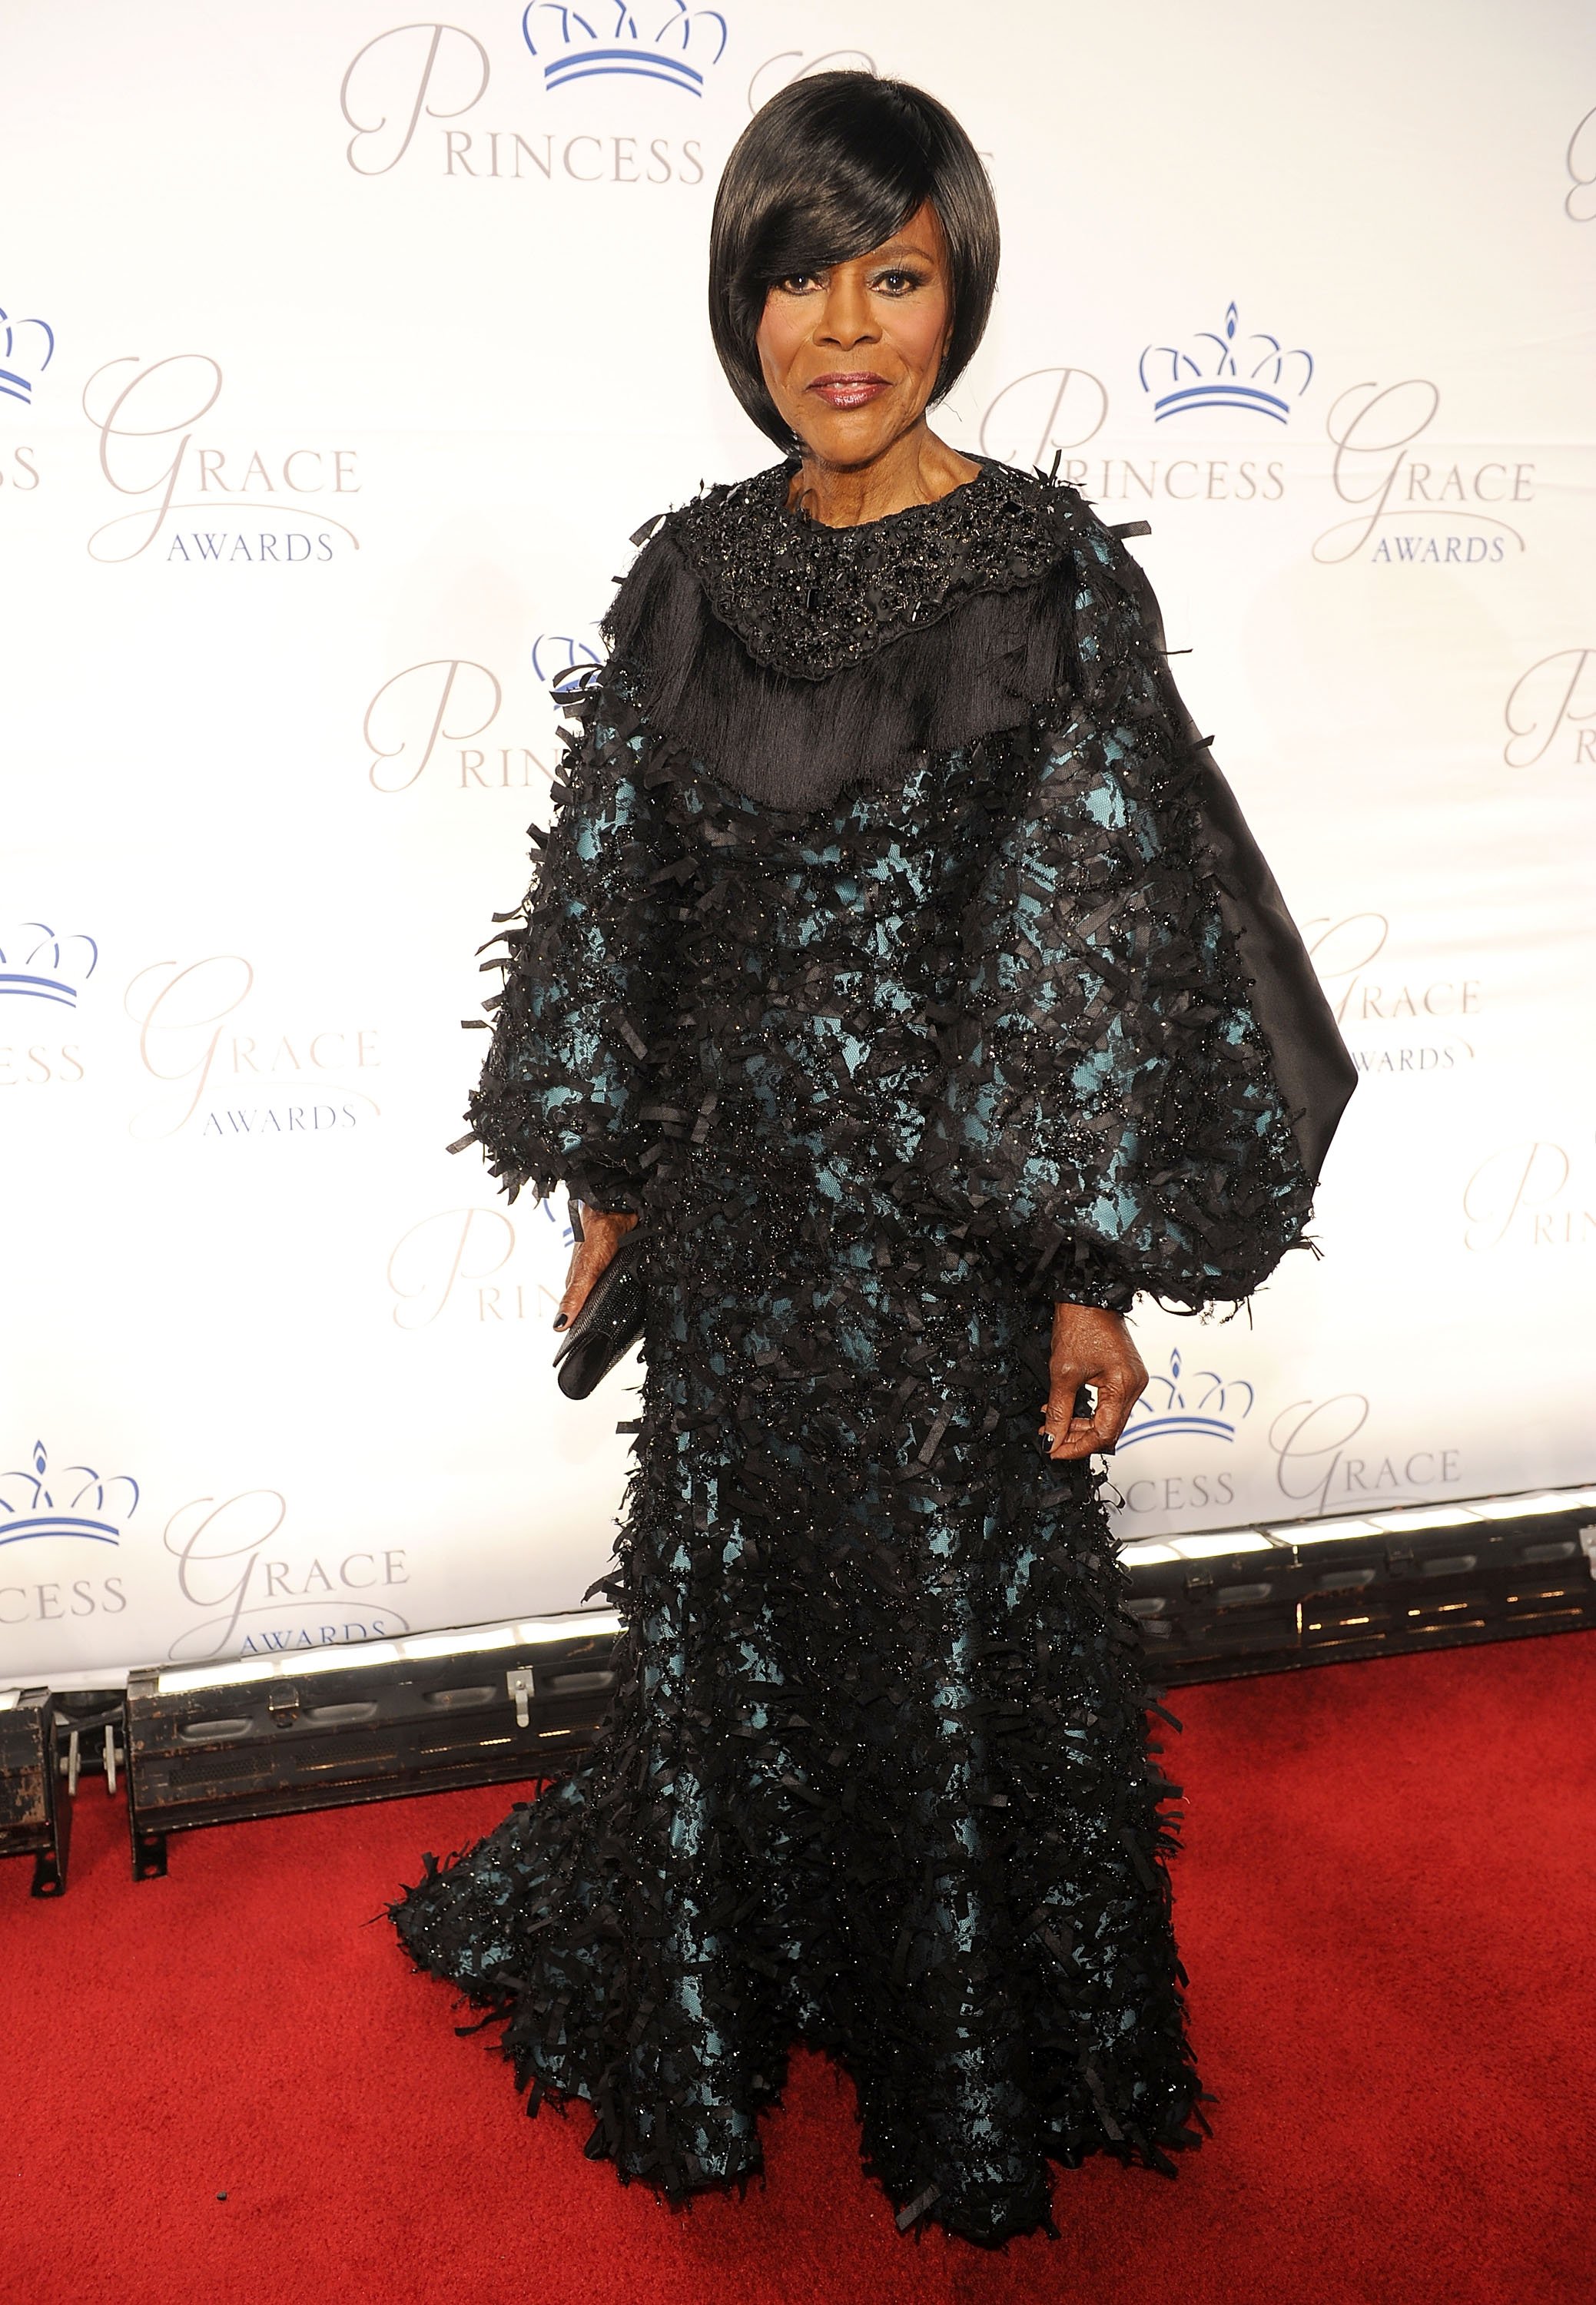 Cicely Tyson attends the 2013 Princess Grace Awards Gala at Cipriani 42nd Street on October 30, 2013 in New York City. | Photo: Getty Images